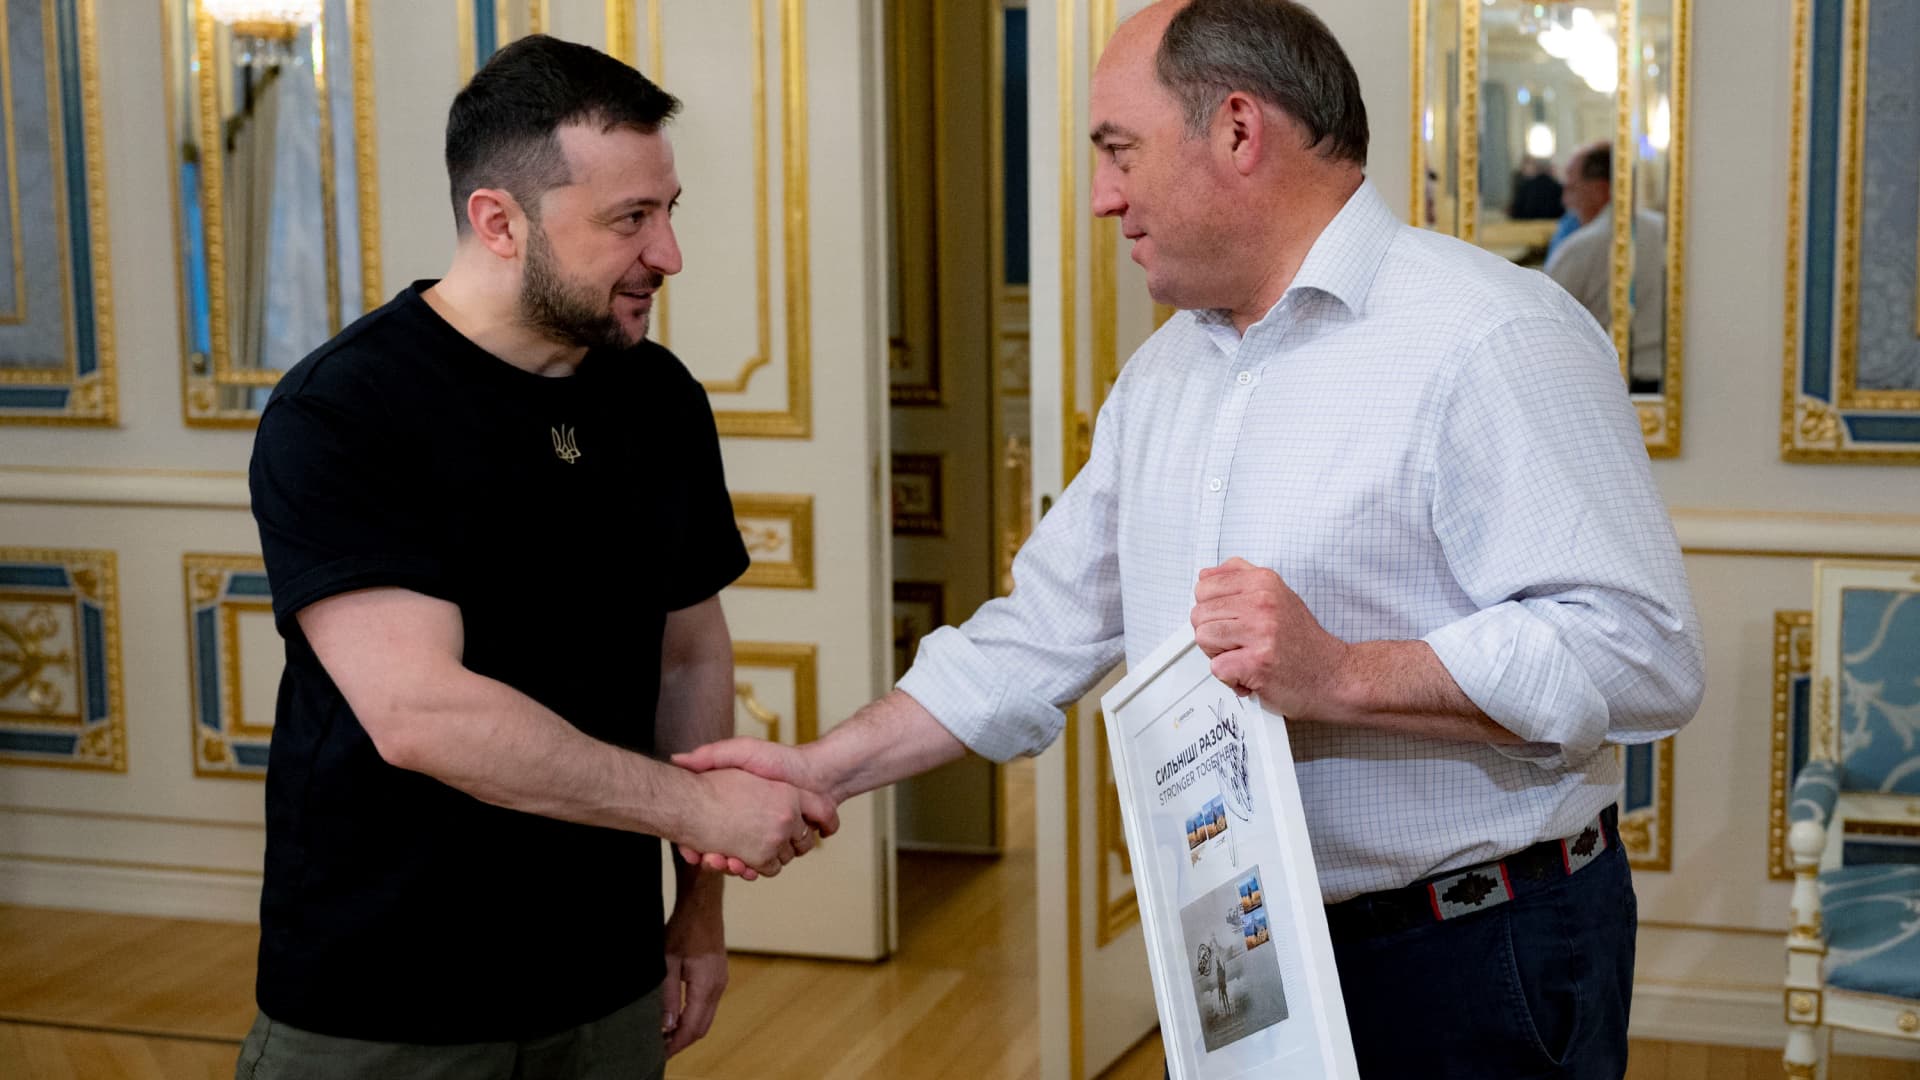 British Defence Secretary Ben Wallace and Ukraine's President Volodymyr Zelenskiy shake hands after a meeting, as Russia's attack on Ukraine continues, in Kyiv, Ukraine June 10, 2022.